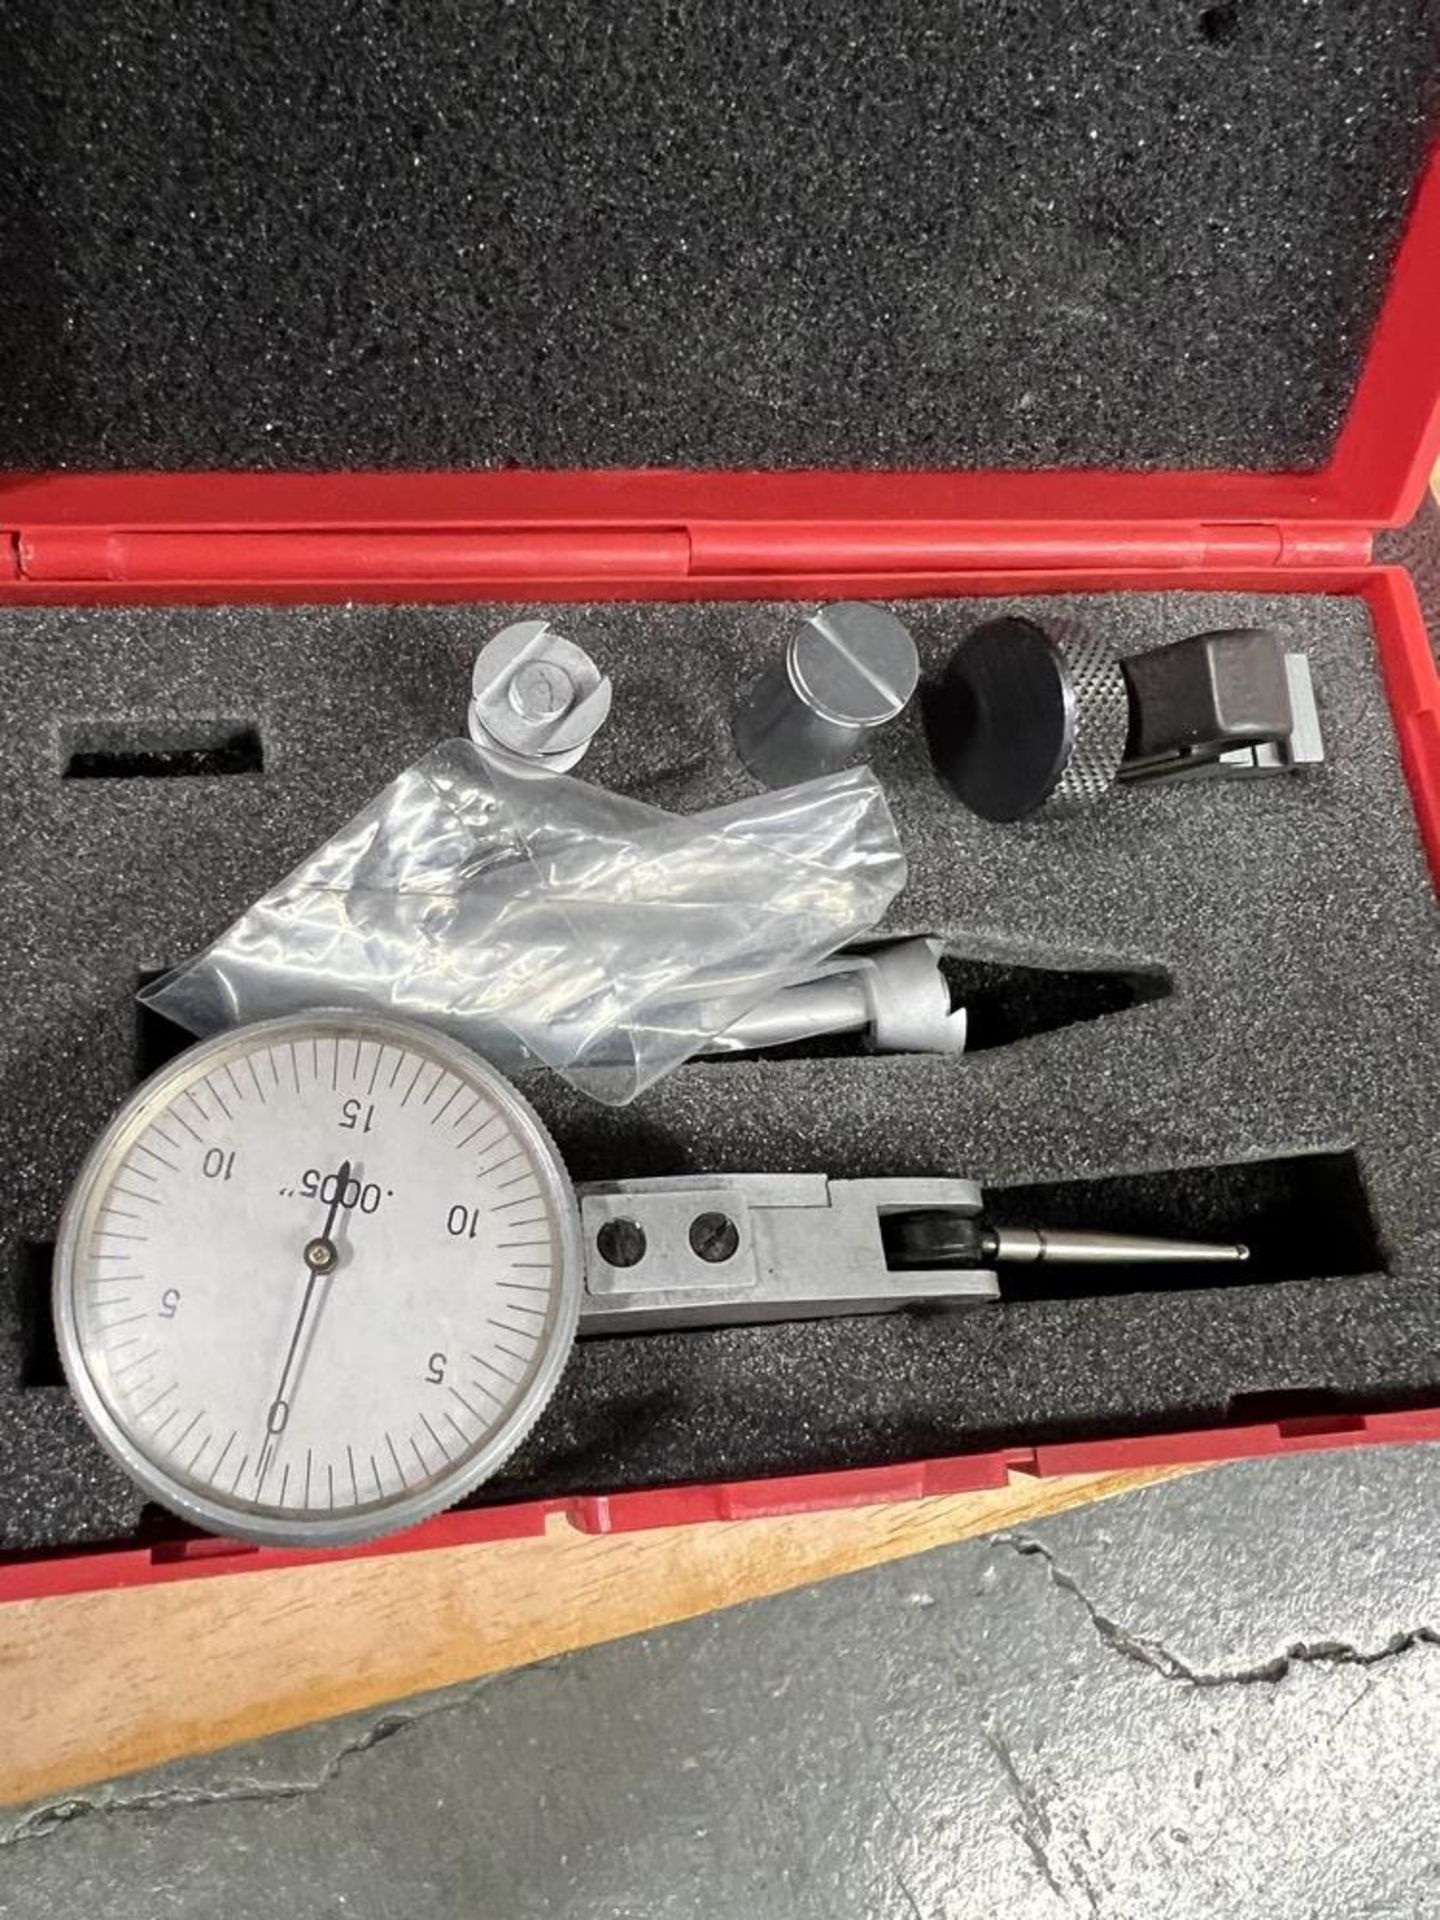 Amtos Precision Height Gage 0-24" With Accessories & SPI Dial Test Indicator - Image 6 of 8